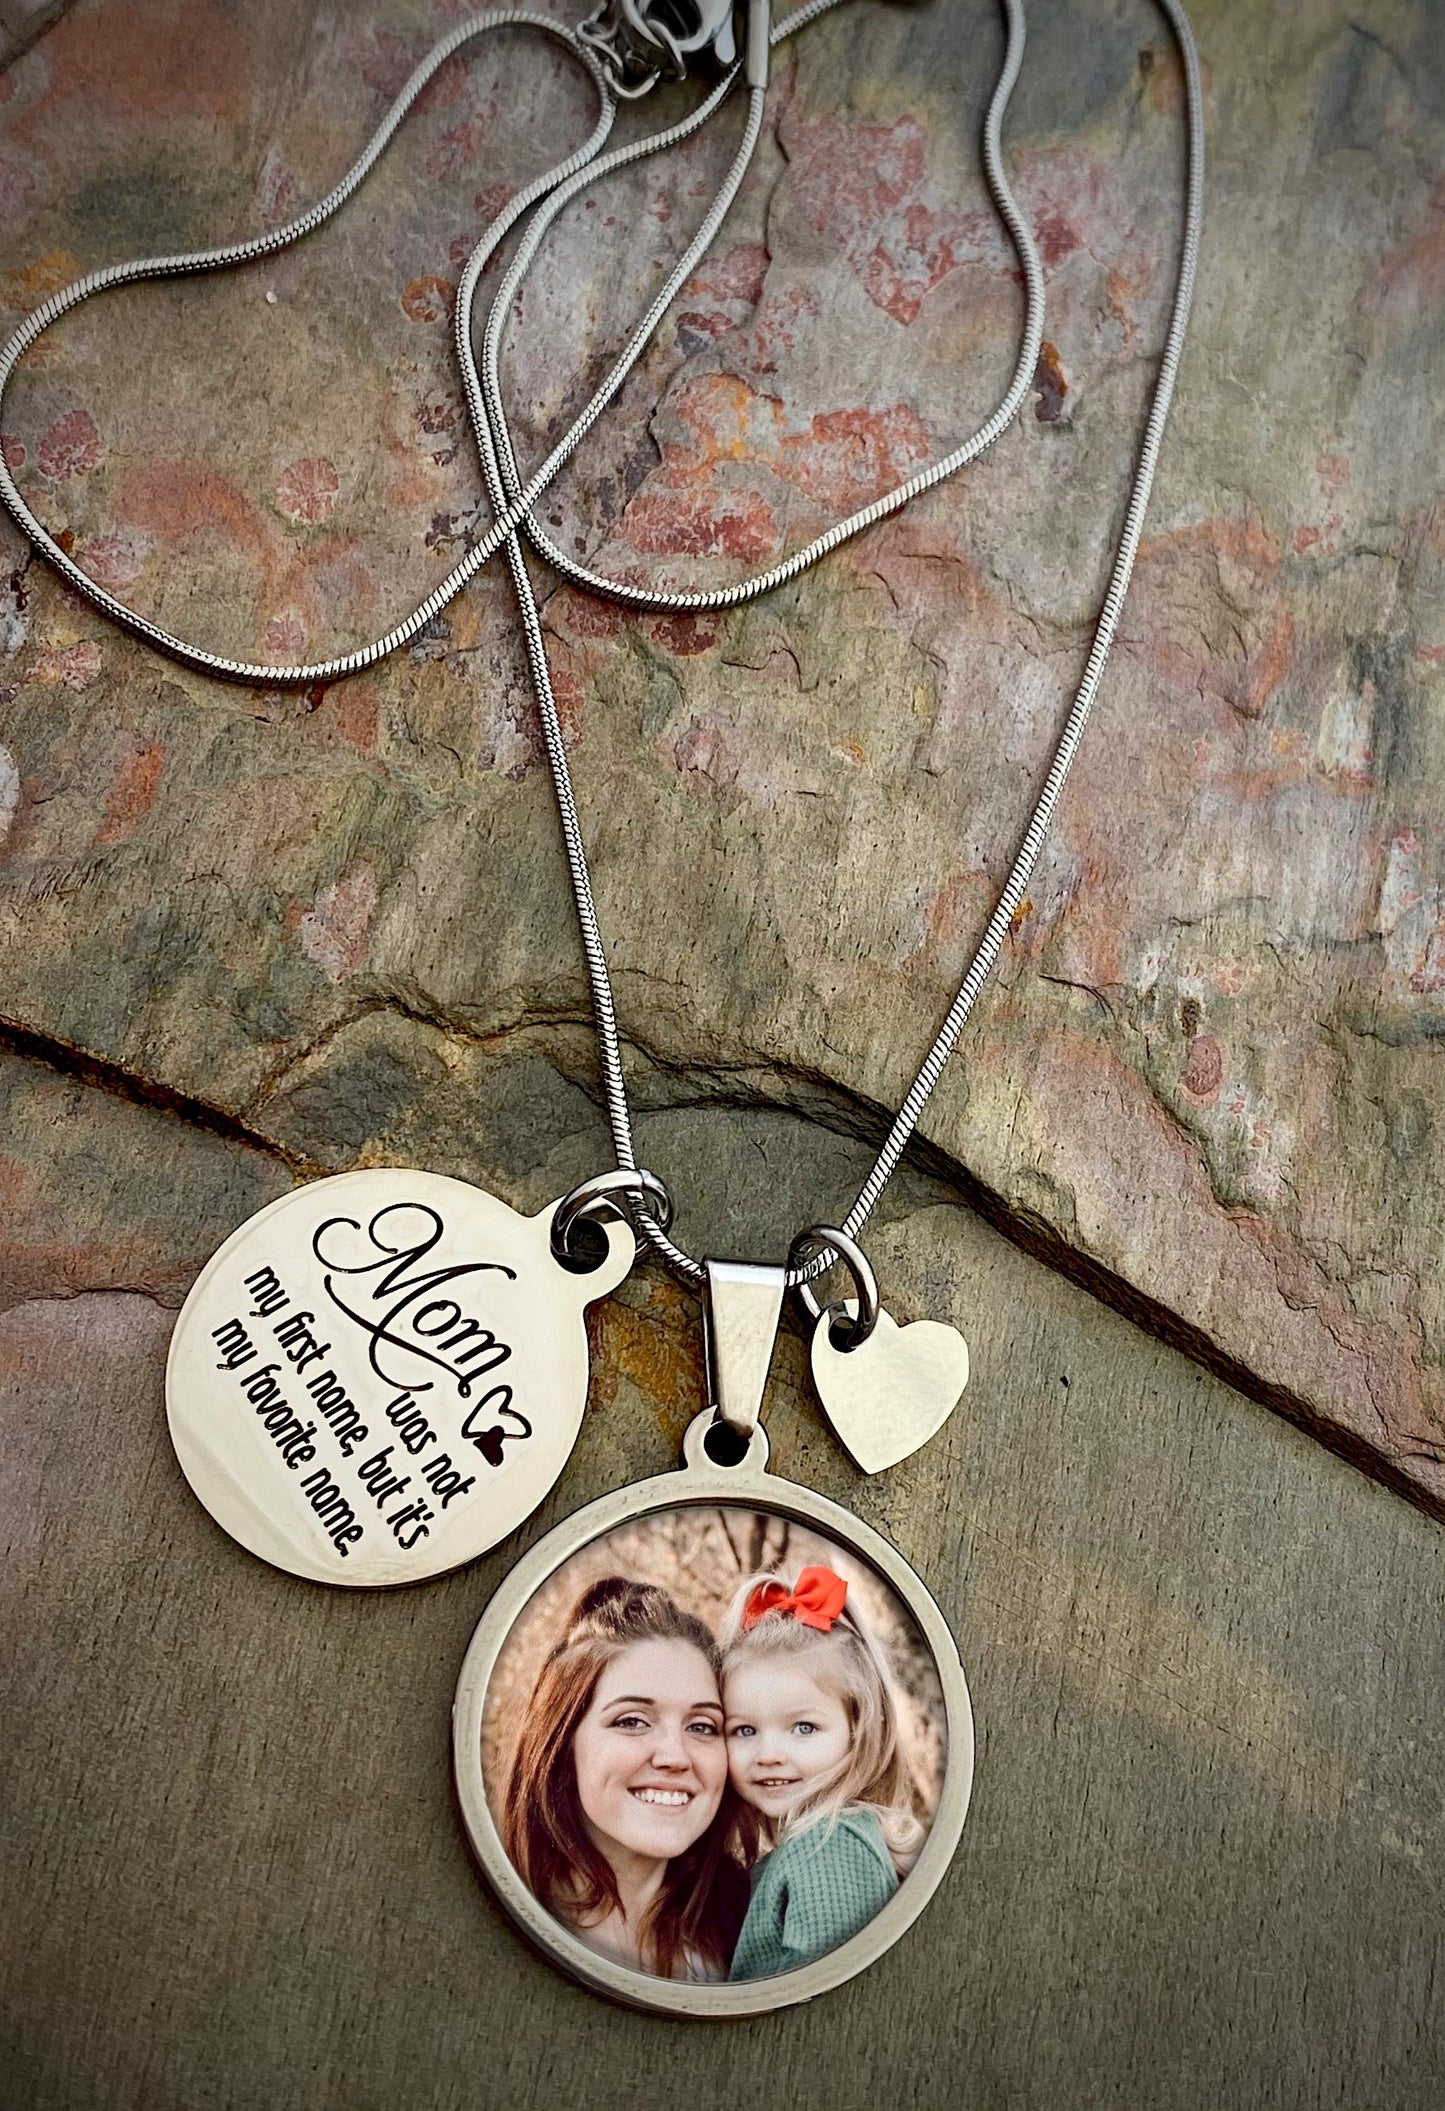 Mom Photo Necklace- Mom was not my first name, but it’s my favorite name